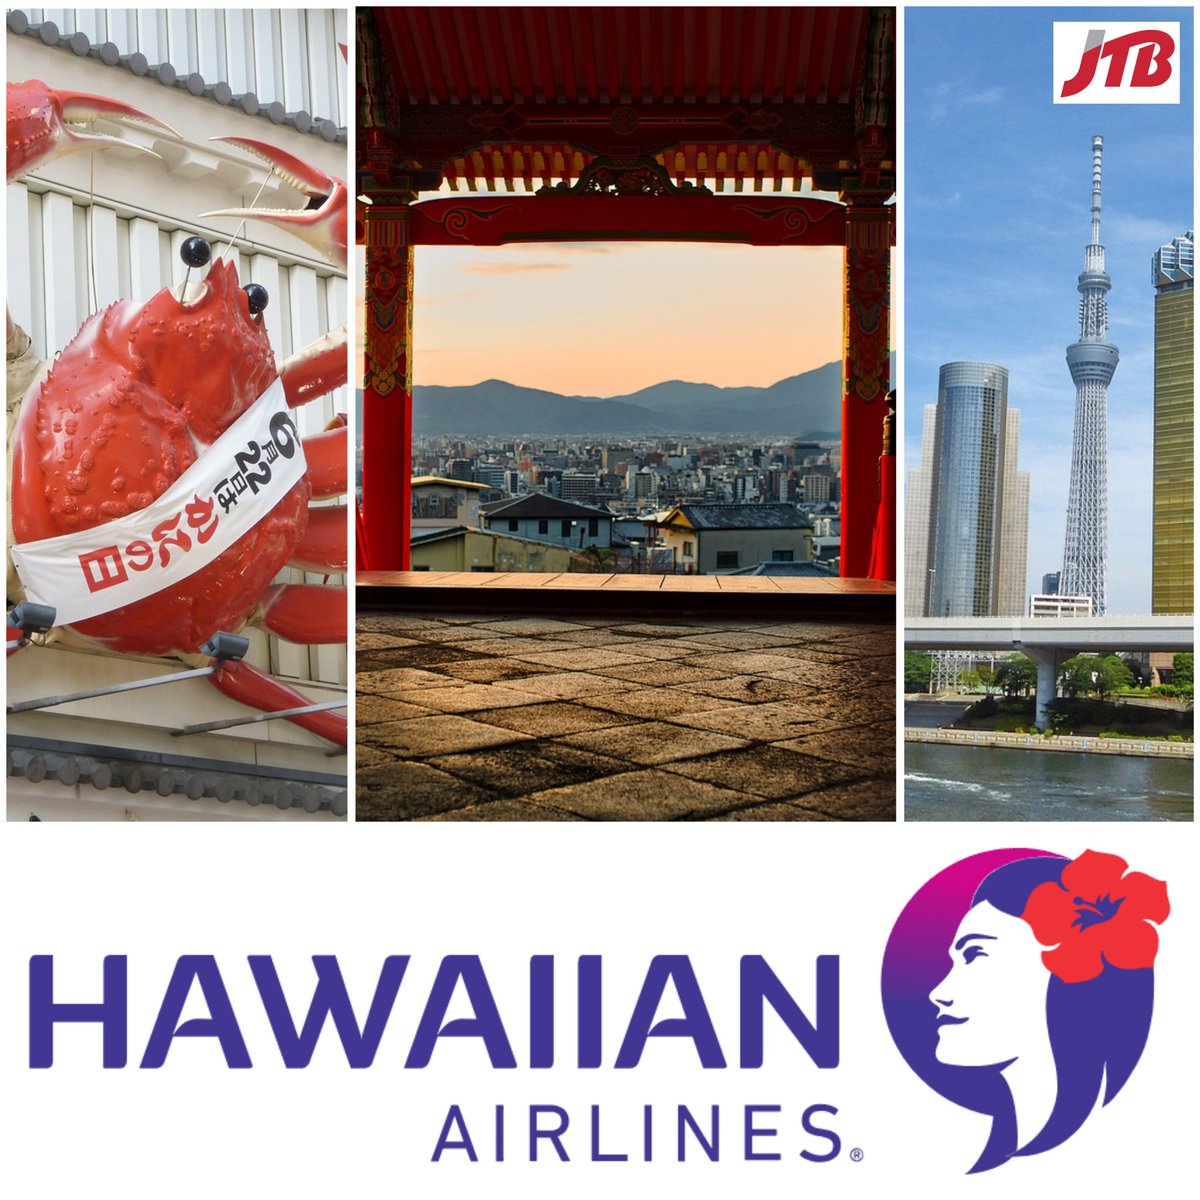 Tokyo, Osaka, Kyoto...take off for Japan 🗾 on Hawaiian Airlines - come by JTB USA Honolulu at @AlaMoanaCenter and check out our air and hotel packages! 🤙

👉 jtbusa.com/Honolulu

#japan #visitjapan #sale #ilovejapan #alamoana #alamoanacenter #flyhawaiian #hawaiianairlines